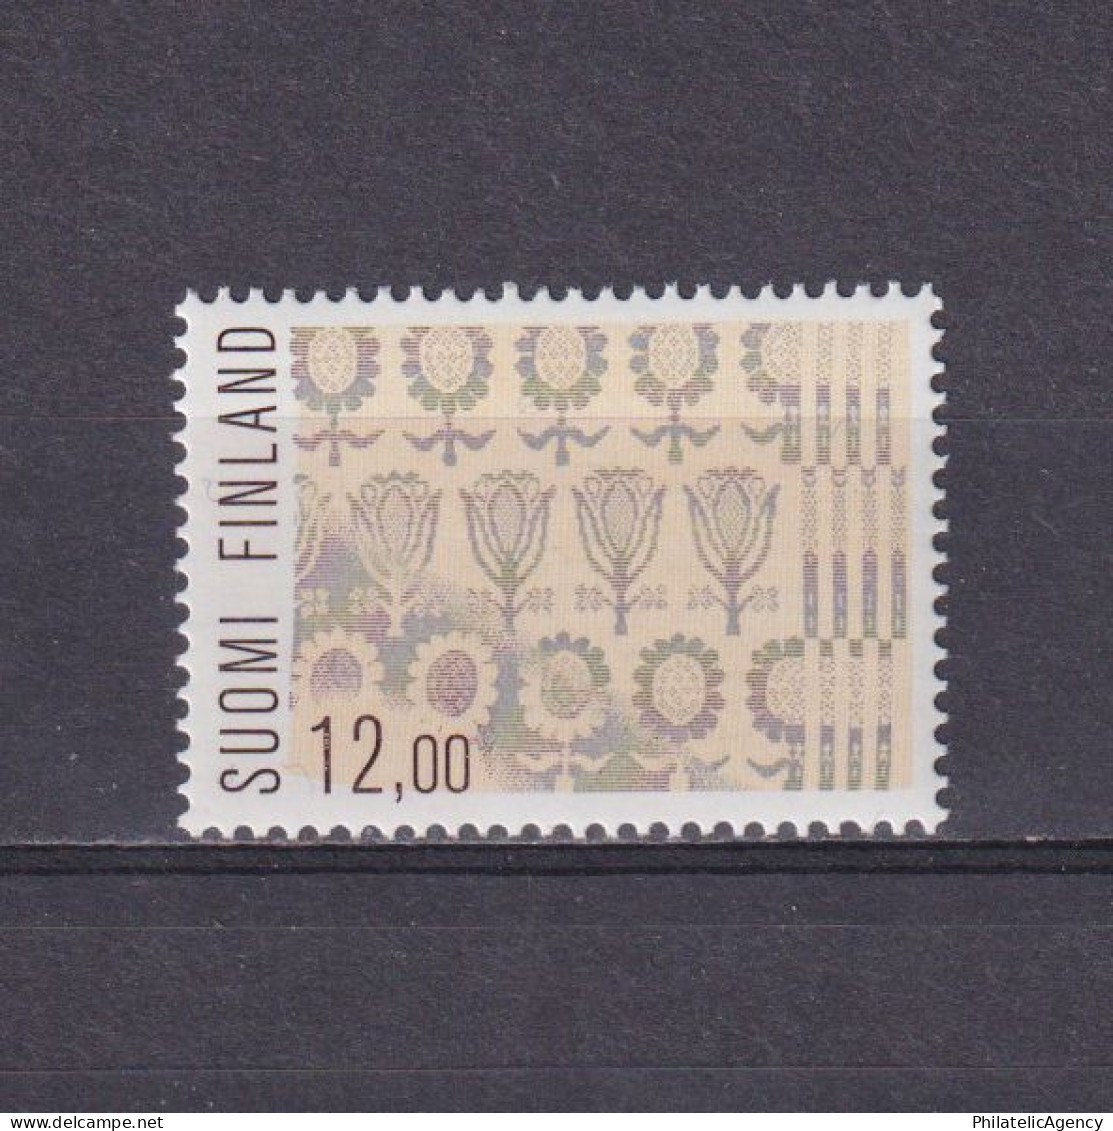 FINLAND 1985, Mi# 972, Tulip Damask Table Cloth, MNH - Unused Stamps